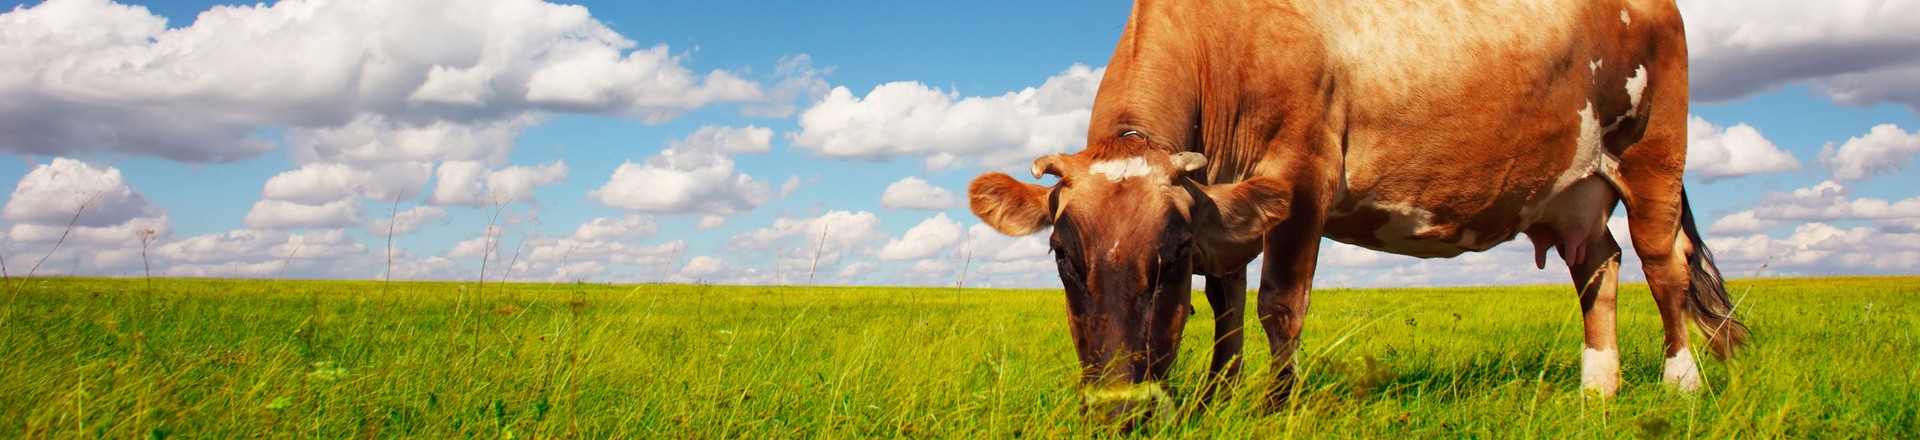 a brown cow grazes inan open field of grass to indicate it is grass fed beef